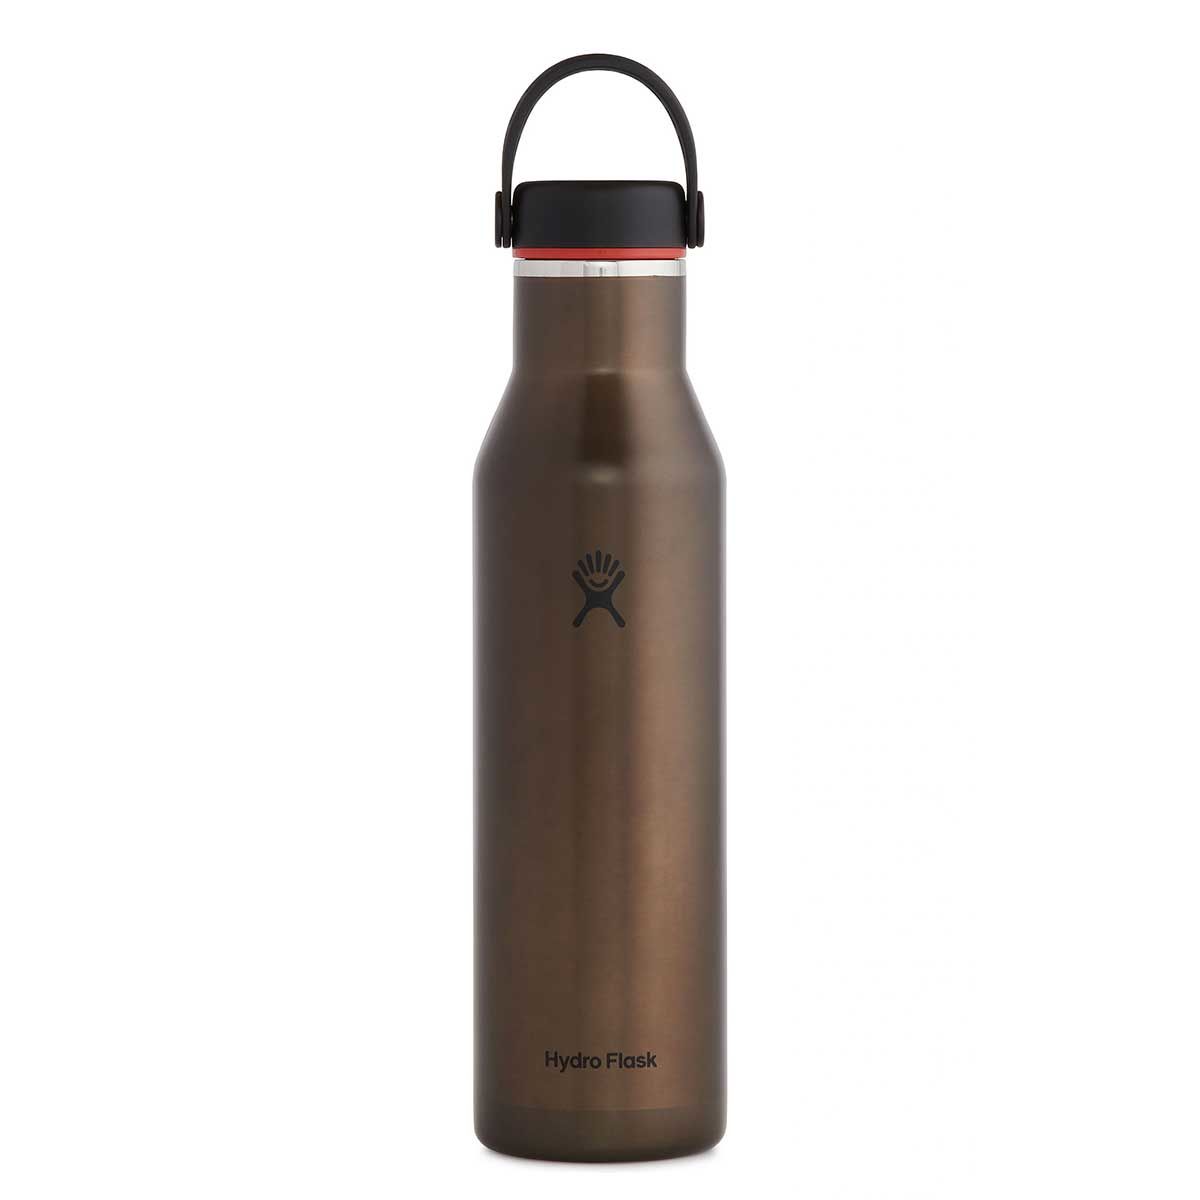 Hydroflask gourde isotherme trail series 0.62l